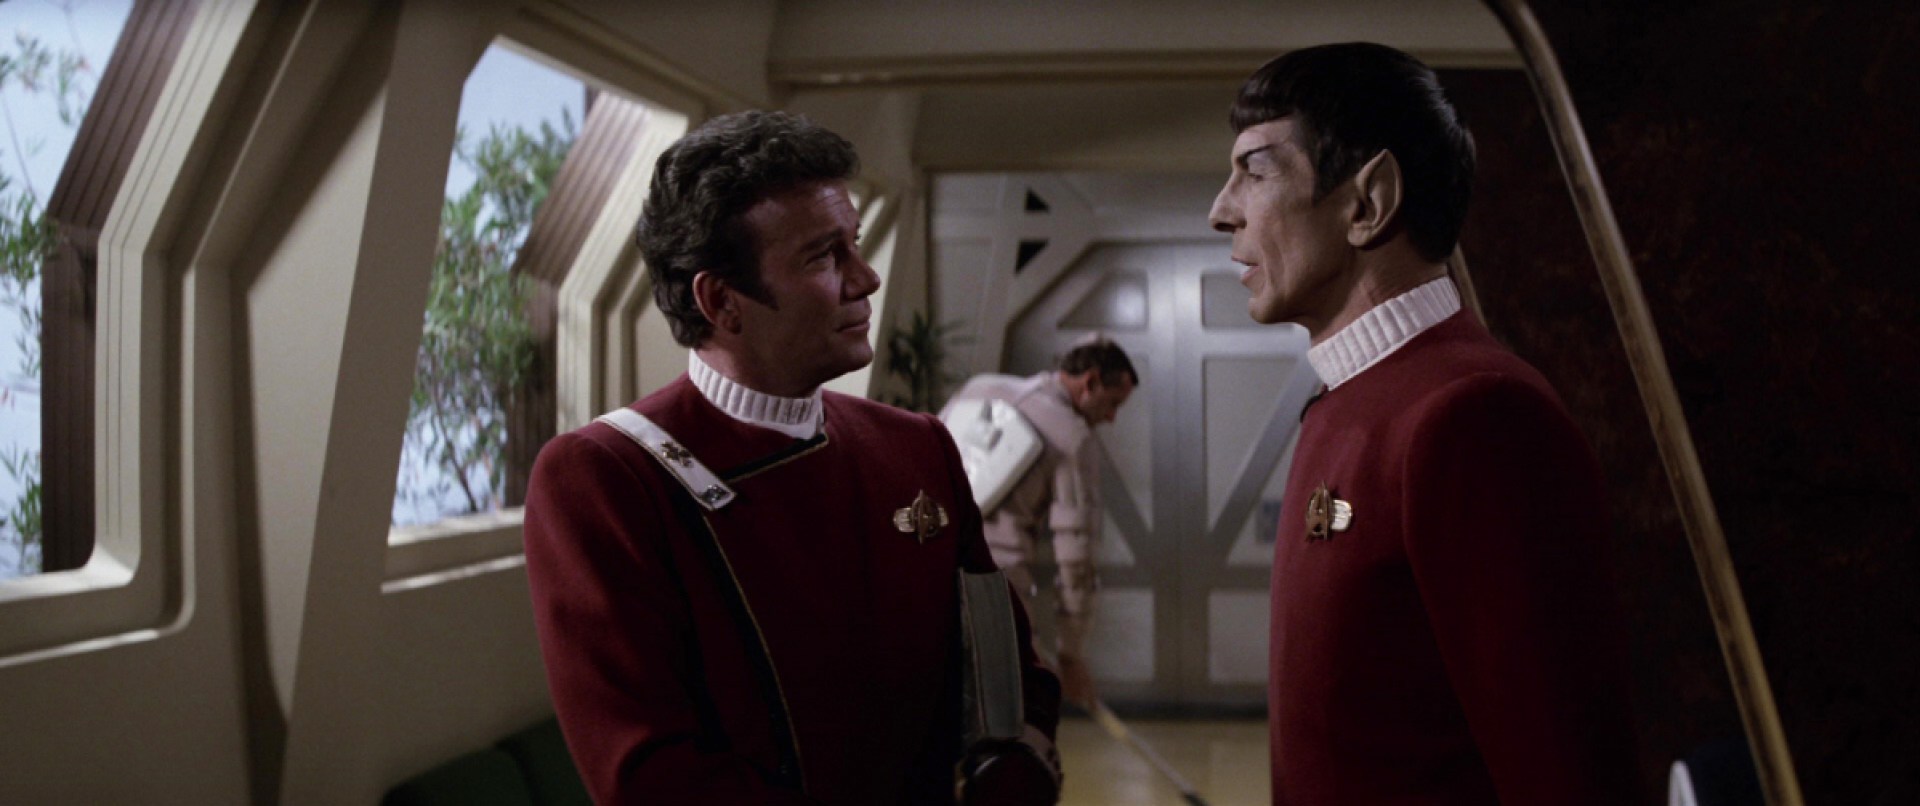 A screen capture of Star Trek: Wrath of Khan that shows a janitor cleaning behind Kirk and Spock.